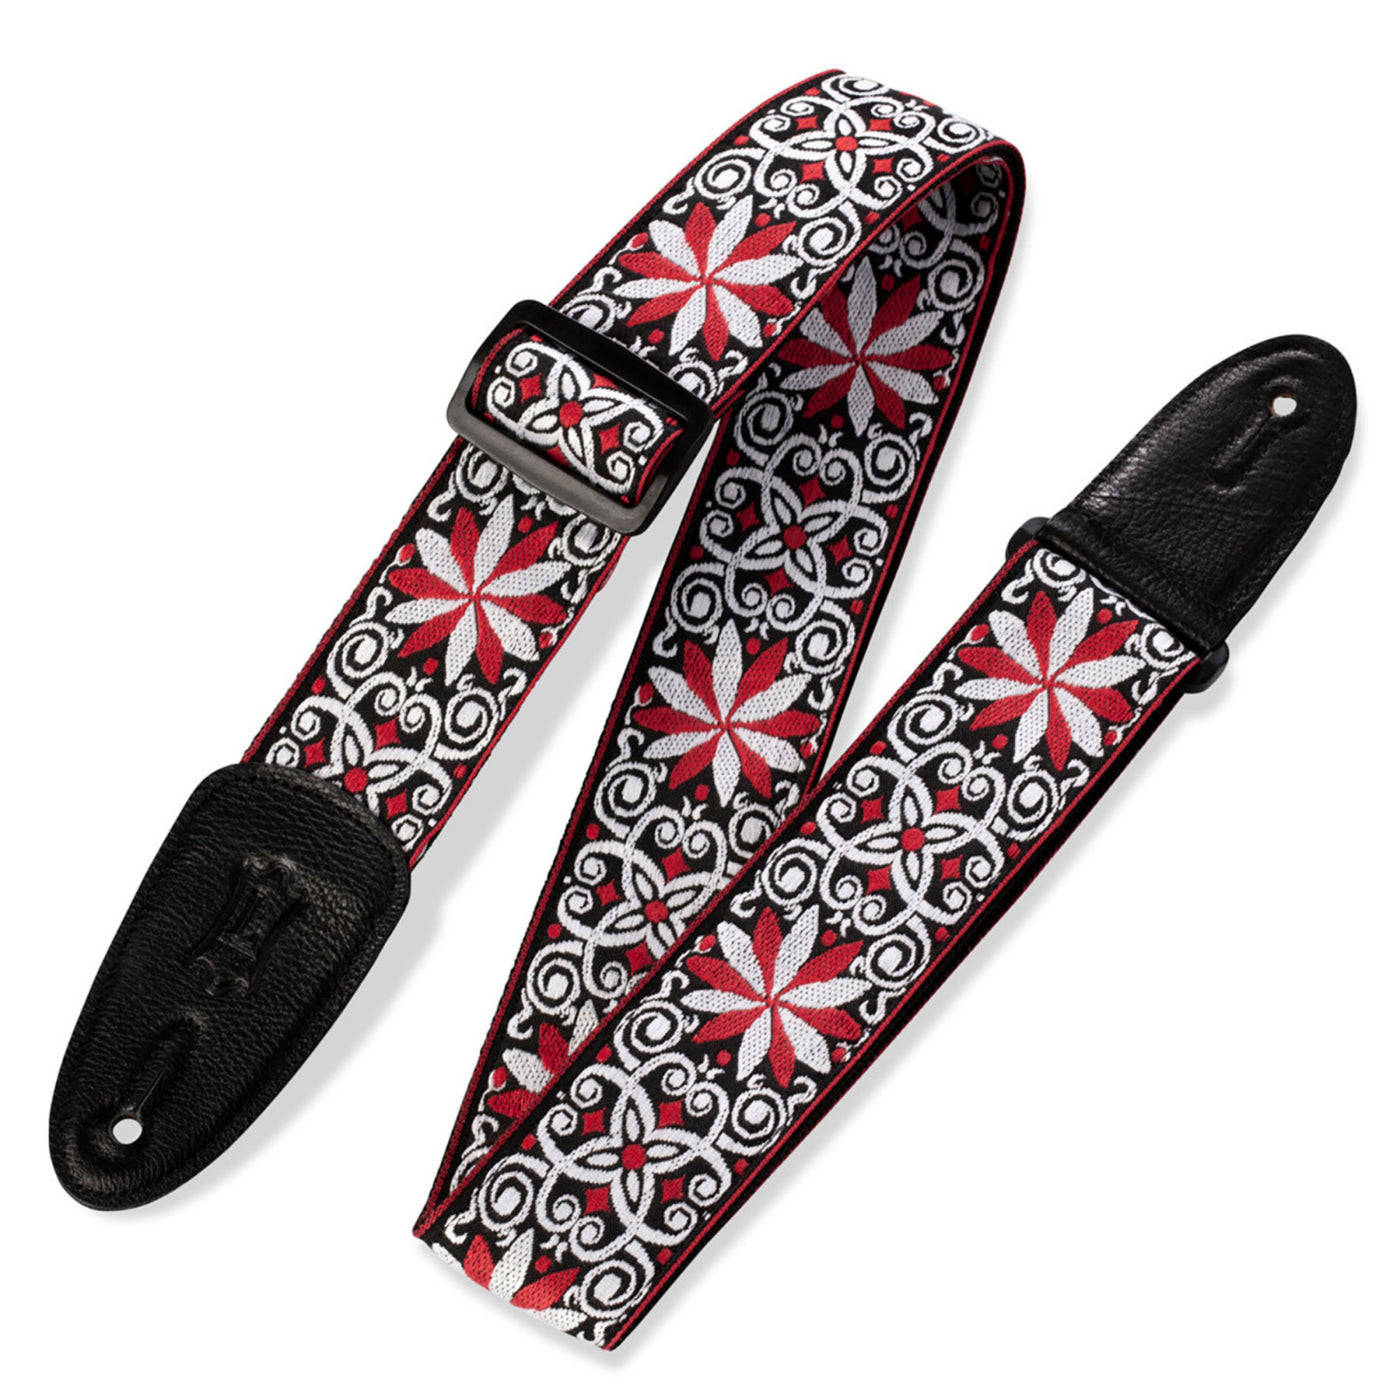 Levy's 2" Woven Strap in Red & White Floral